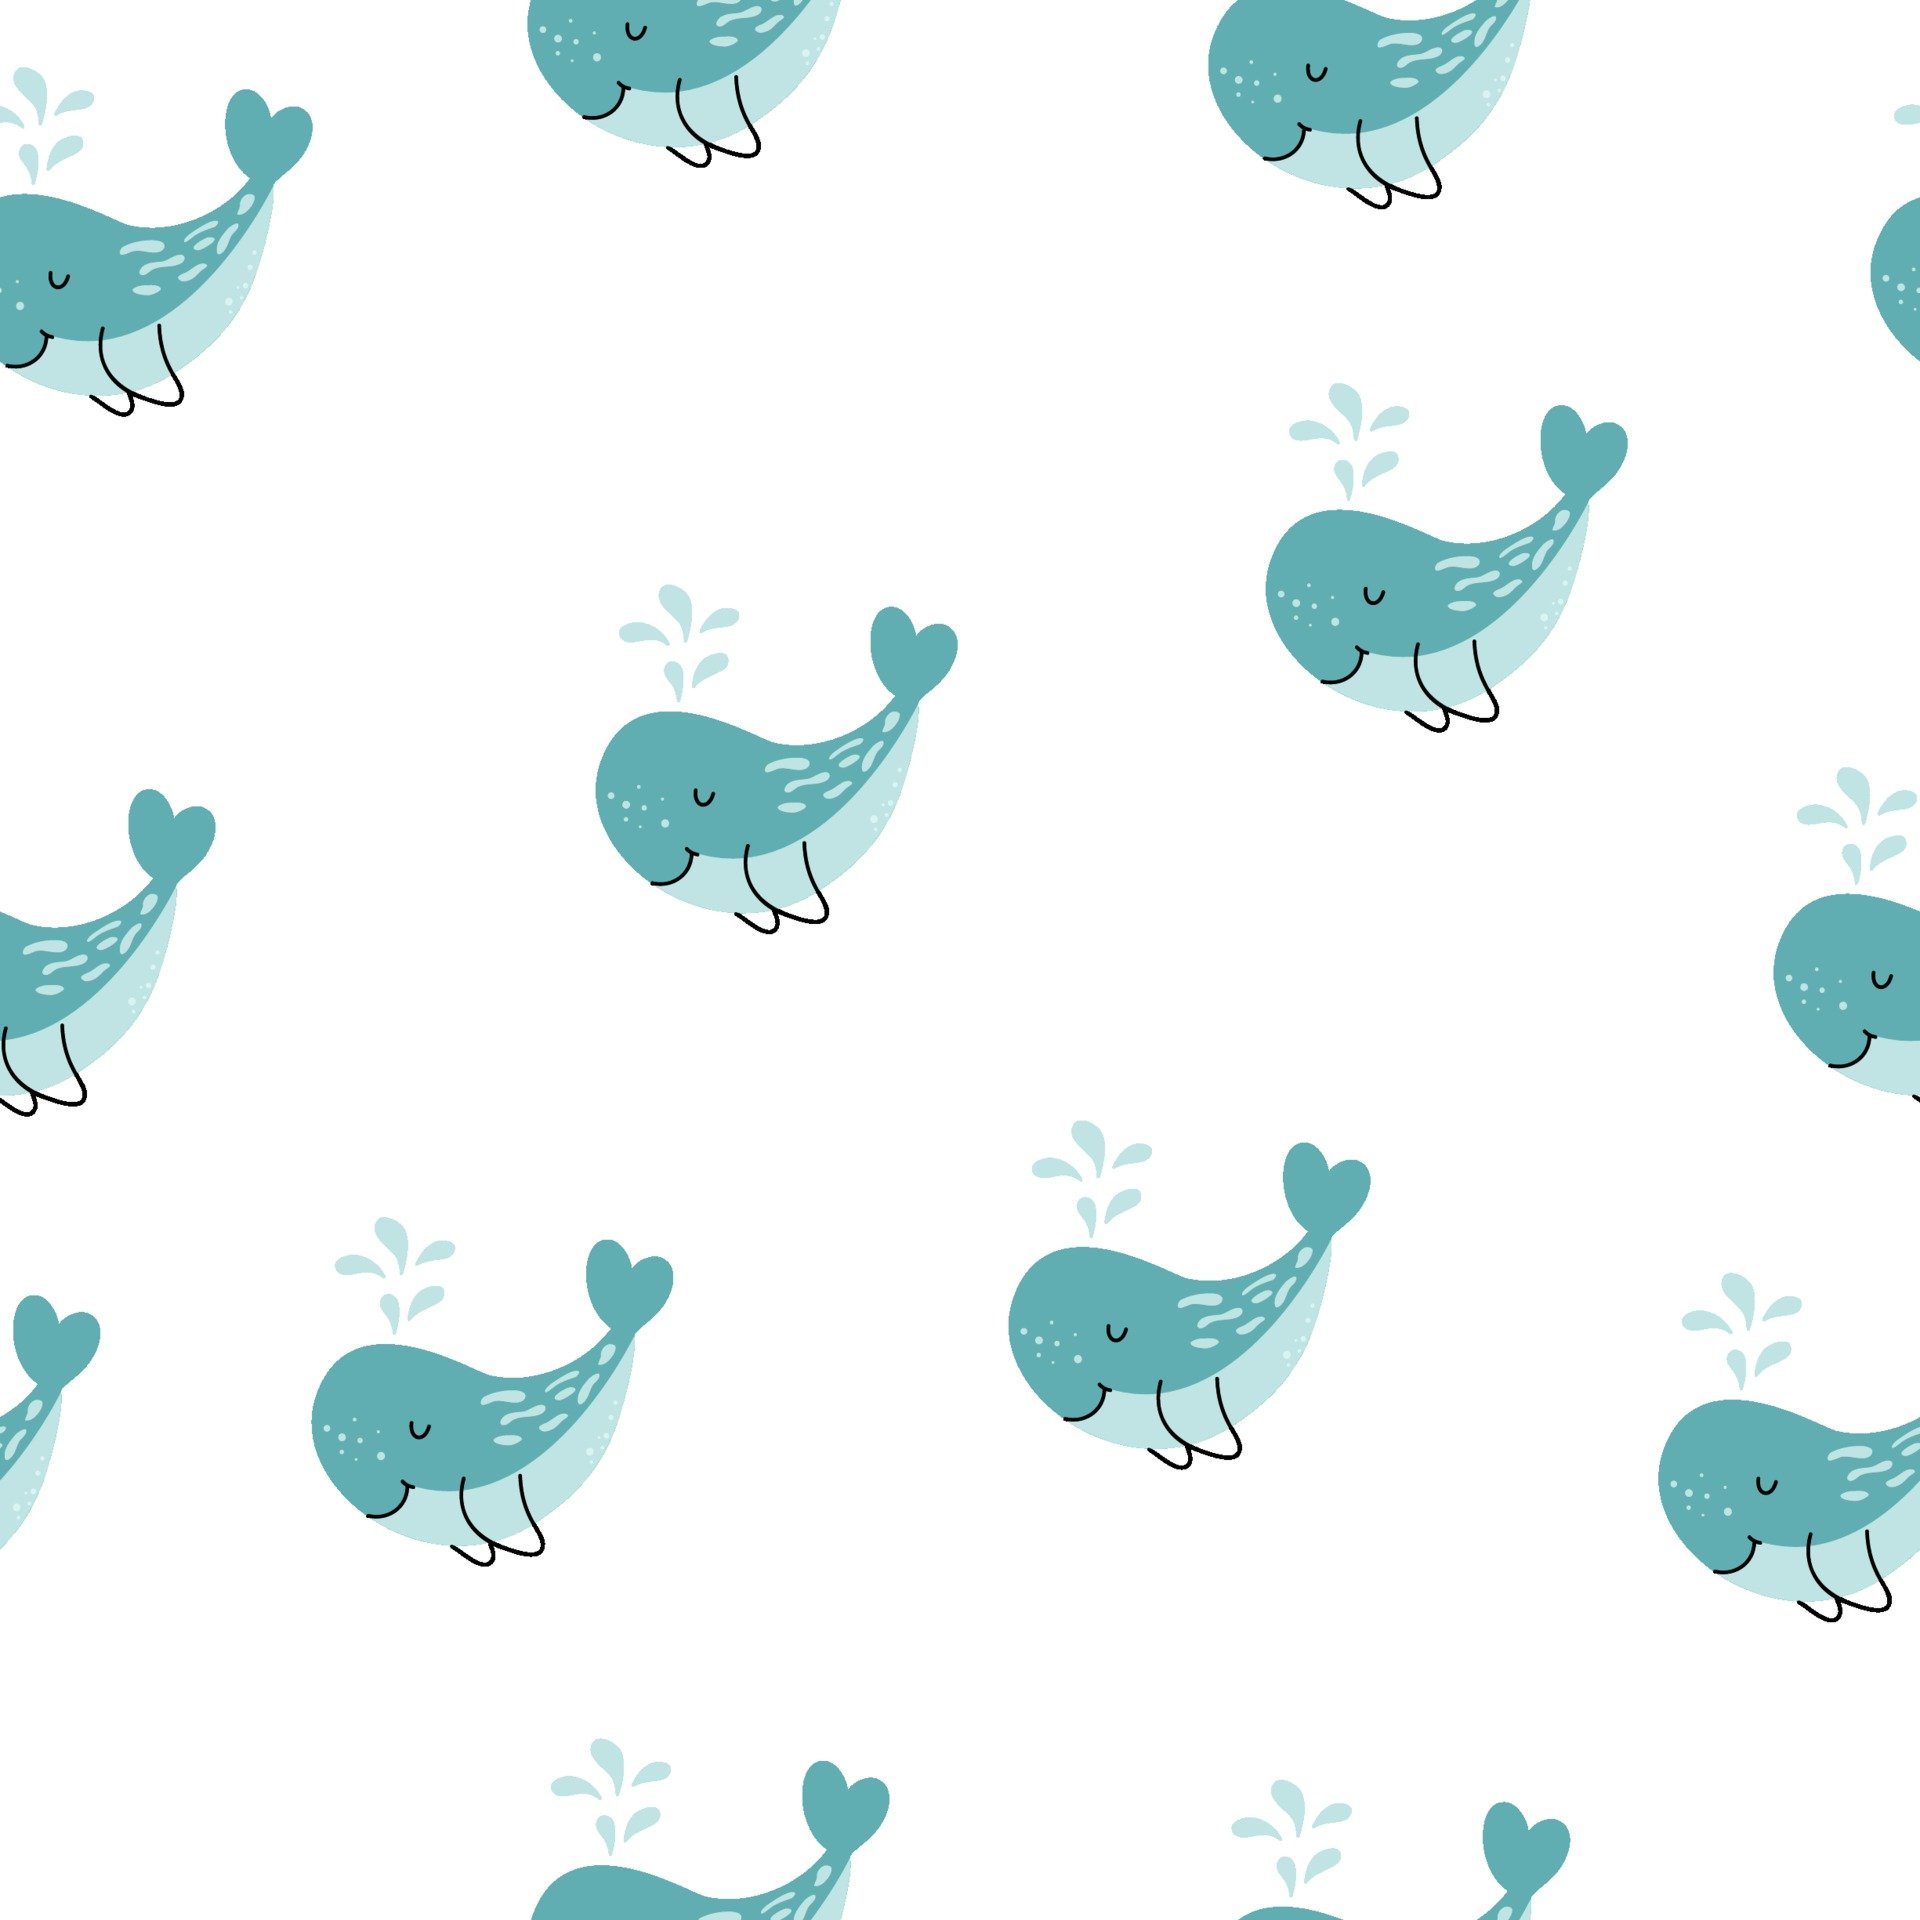 Cute background with cartoon blue whales. Baby shower design. Seamless pattern can be used for wallpaper, kids pattern fills, surface textures